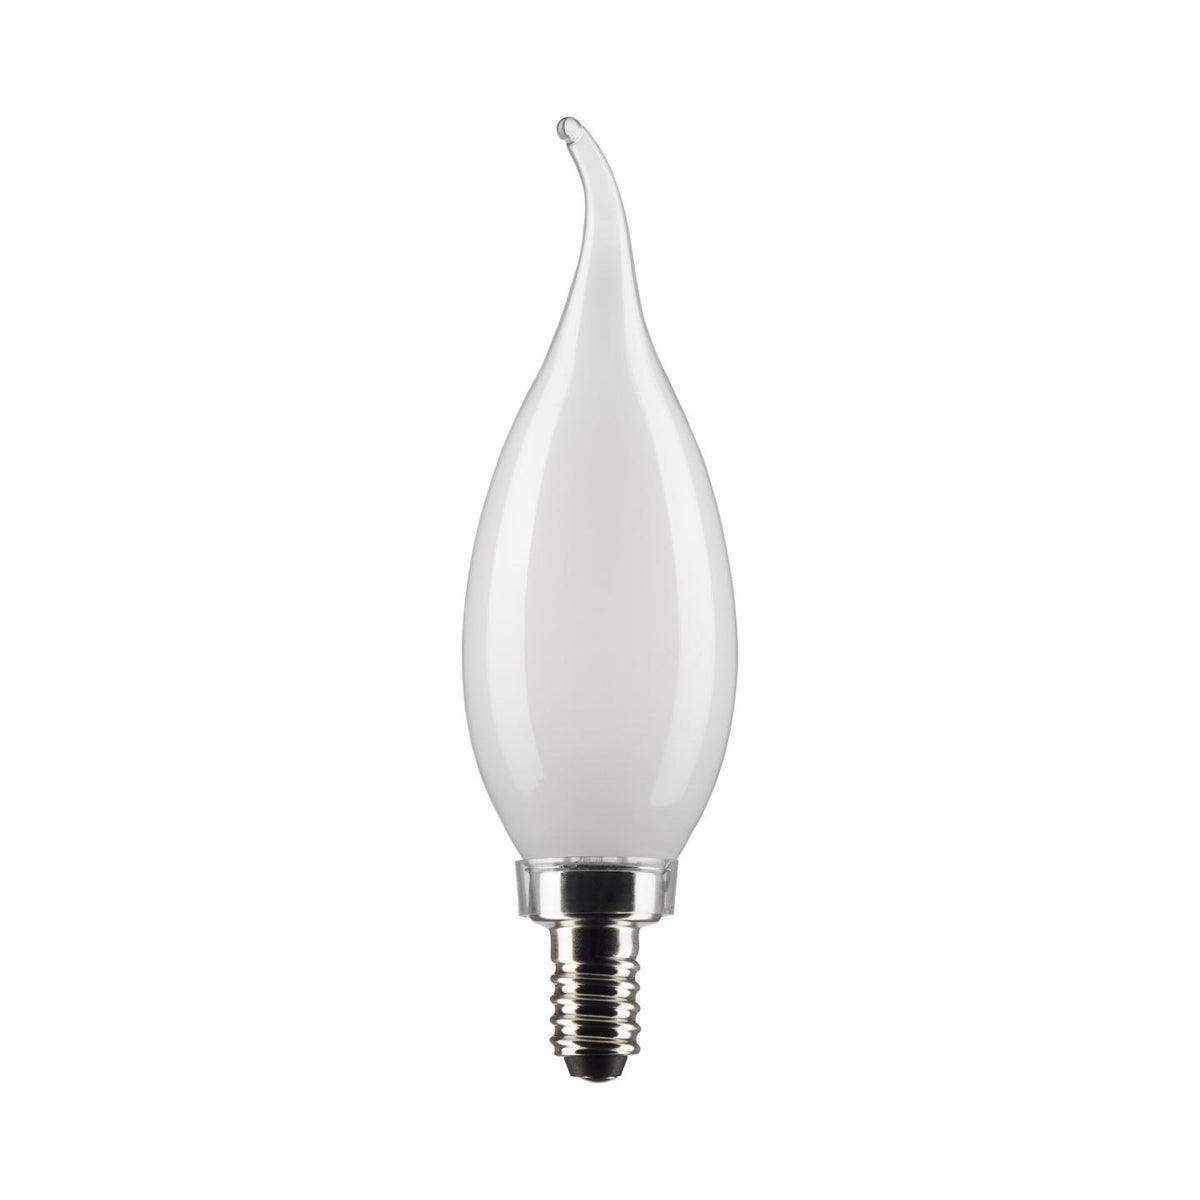 CA10 Candle LED Bulb, 60W Equivalent,6 Watt, 500 Lumens, 2700K, E12 Candelabra Base, Frosted Finish, Pack Of 2 - Bees Lighting